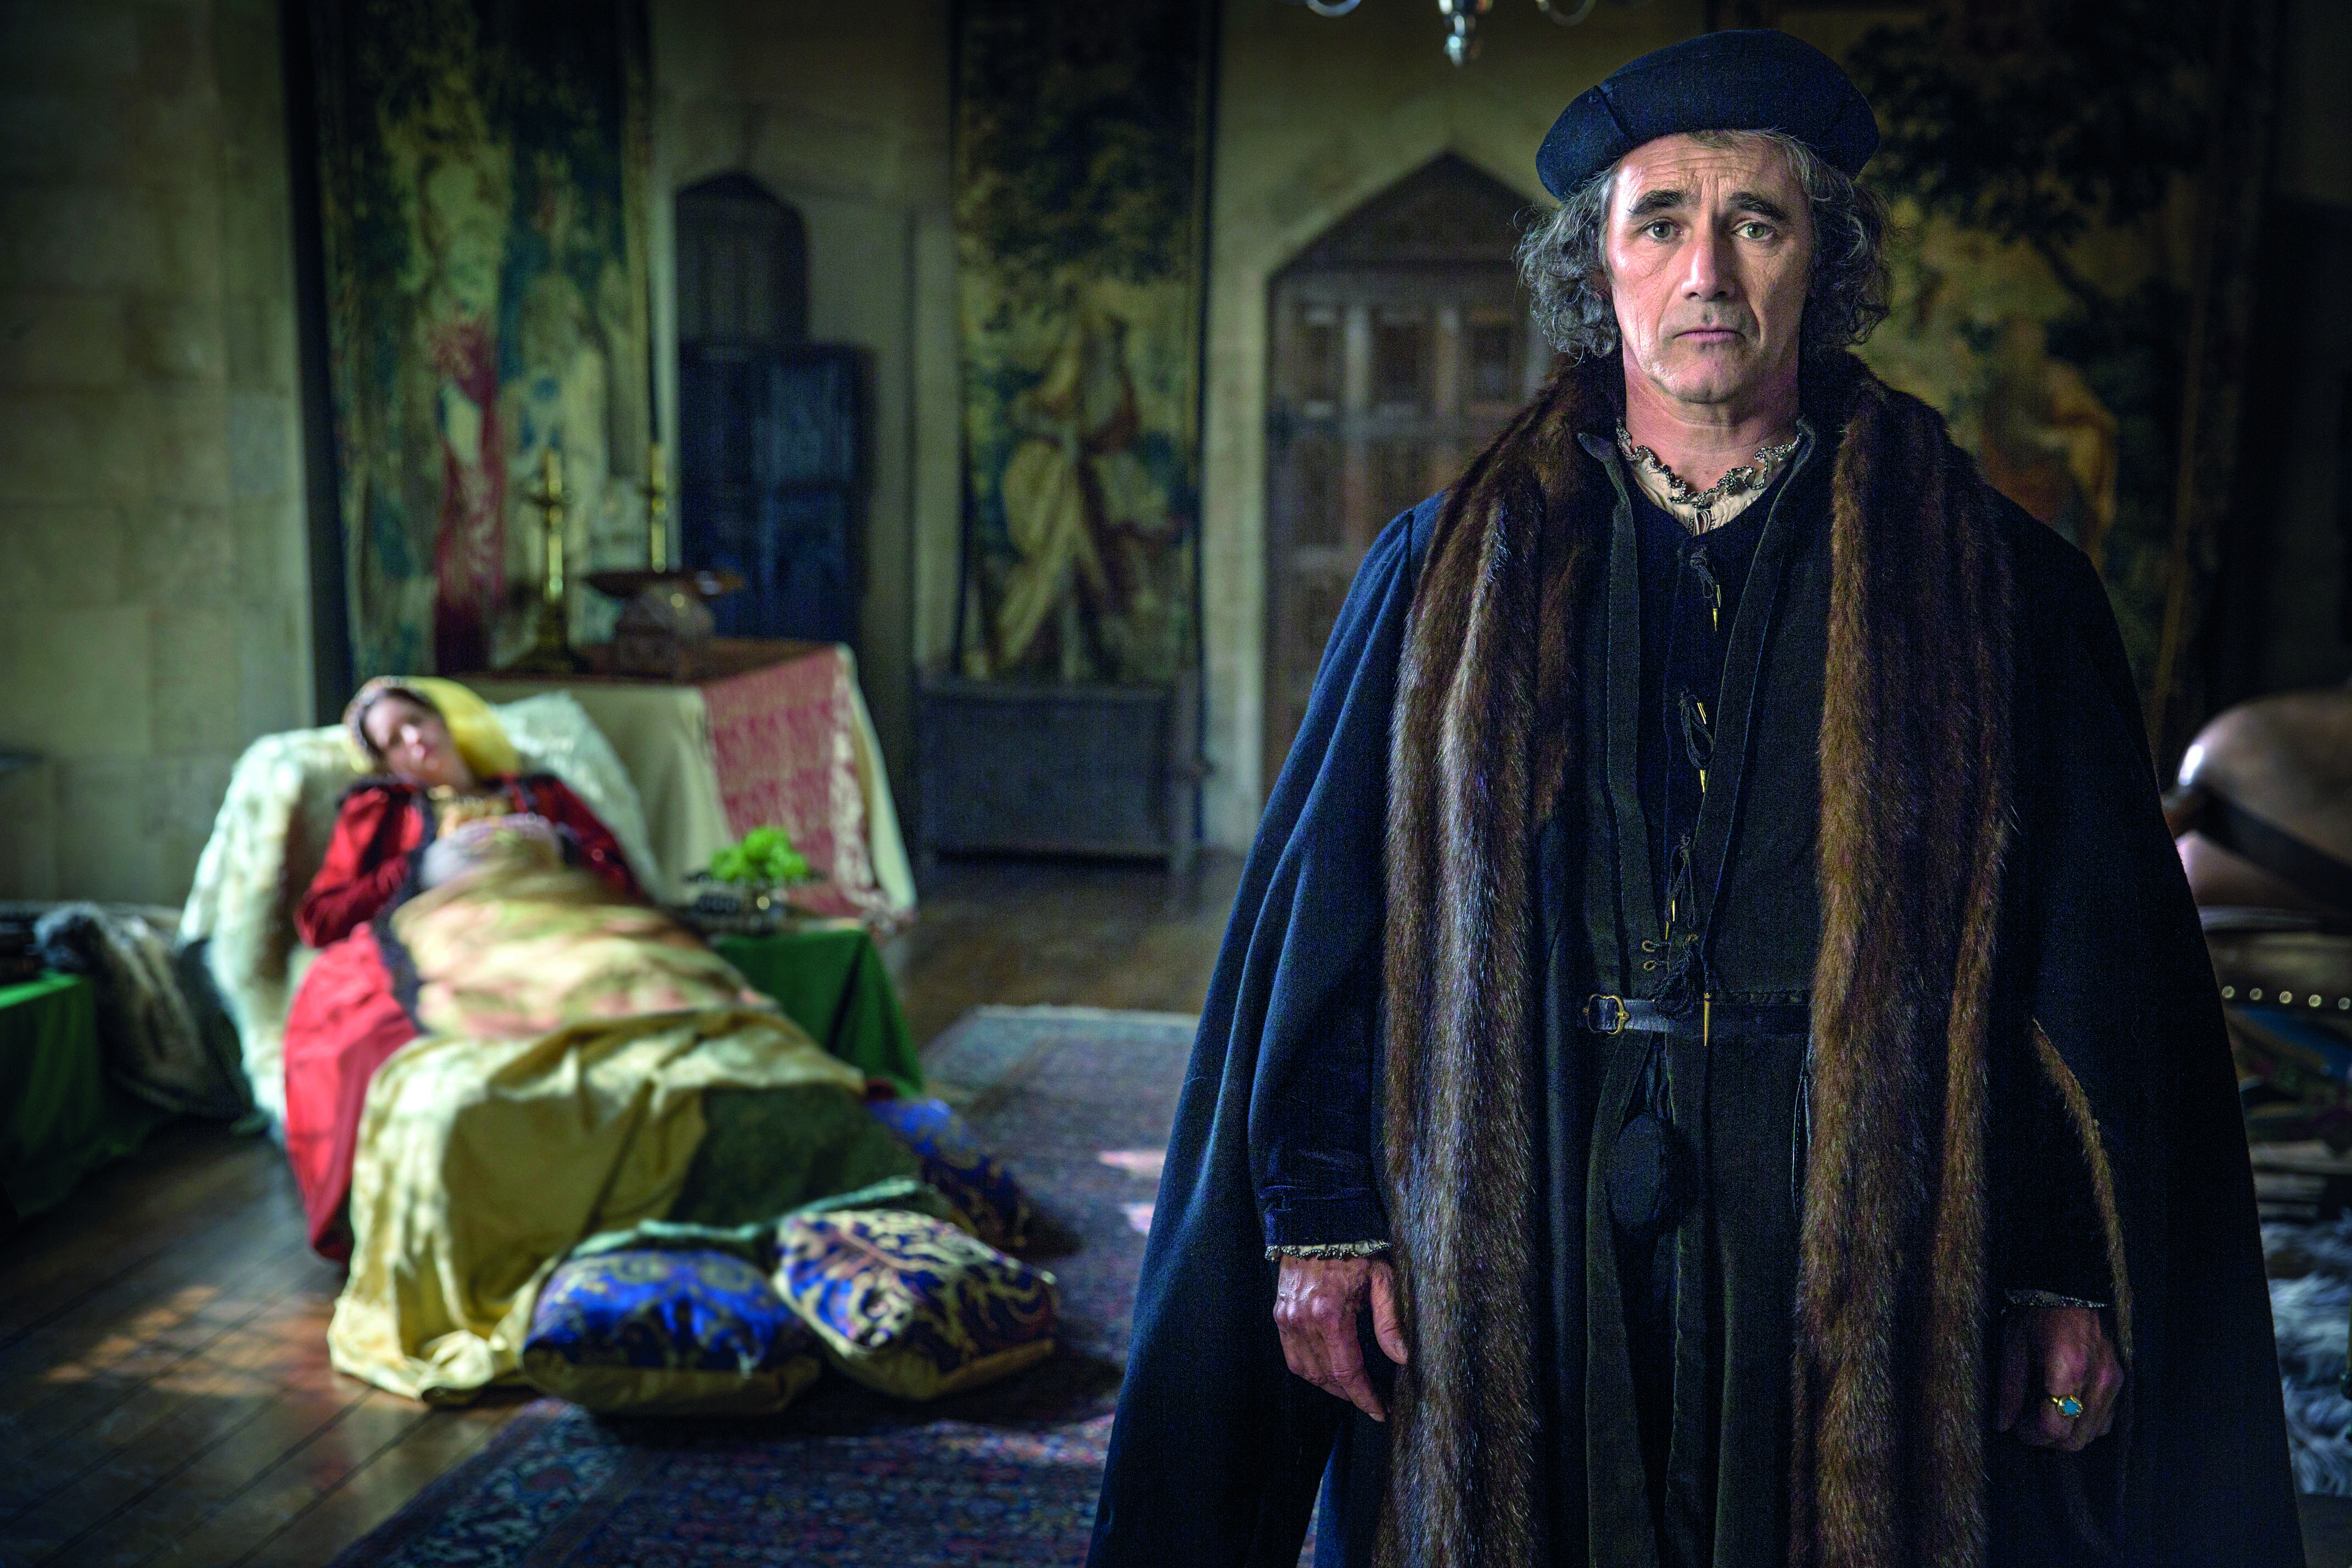 “WolfHall"